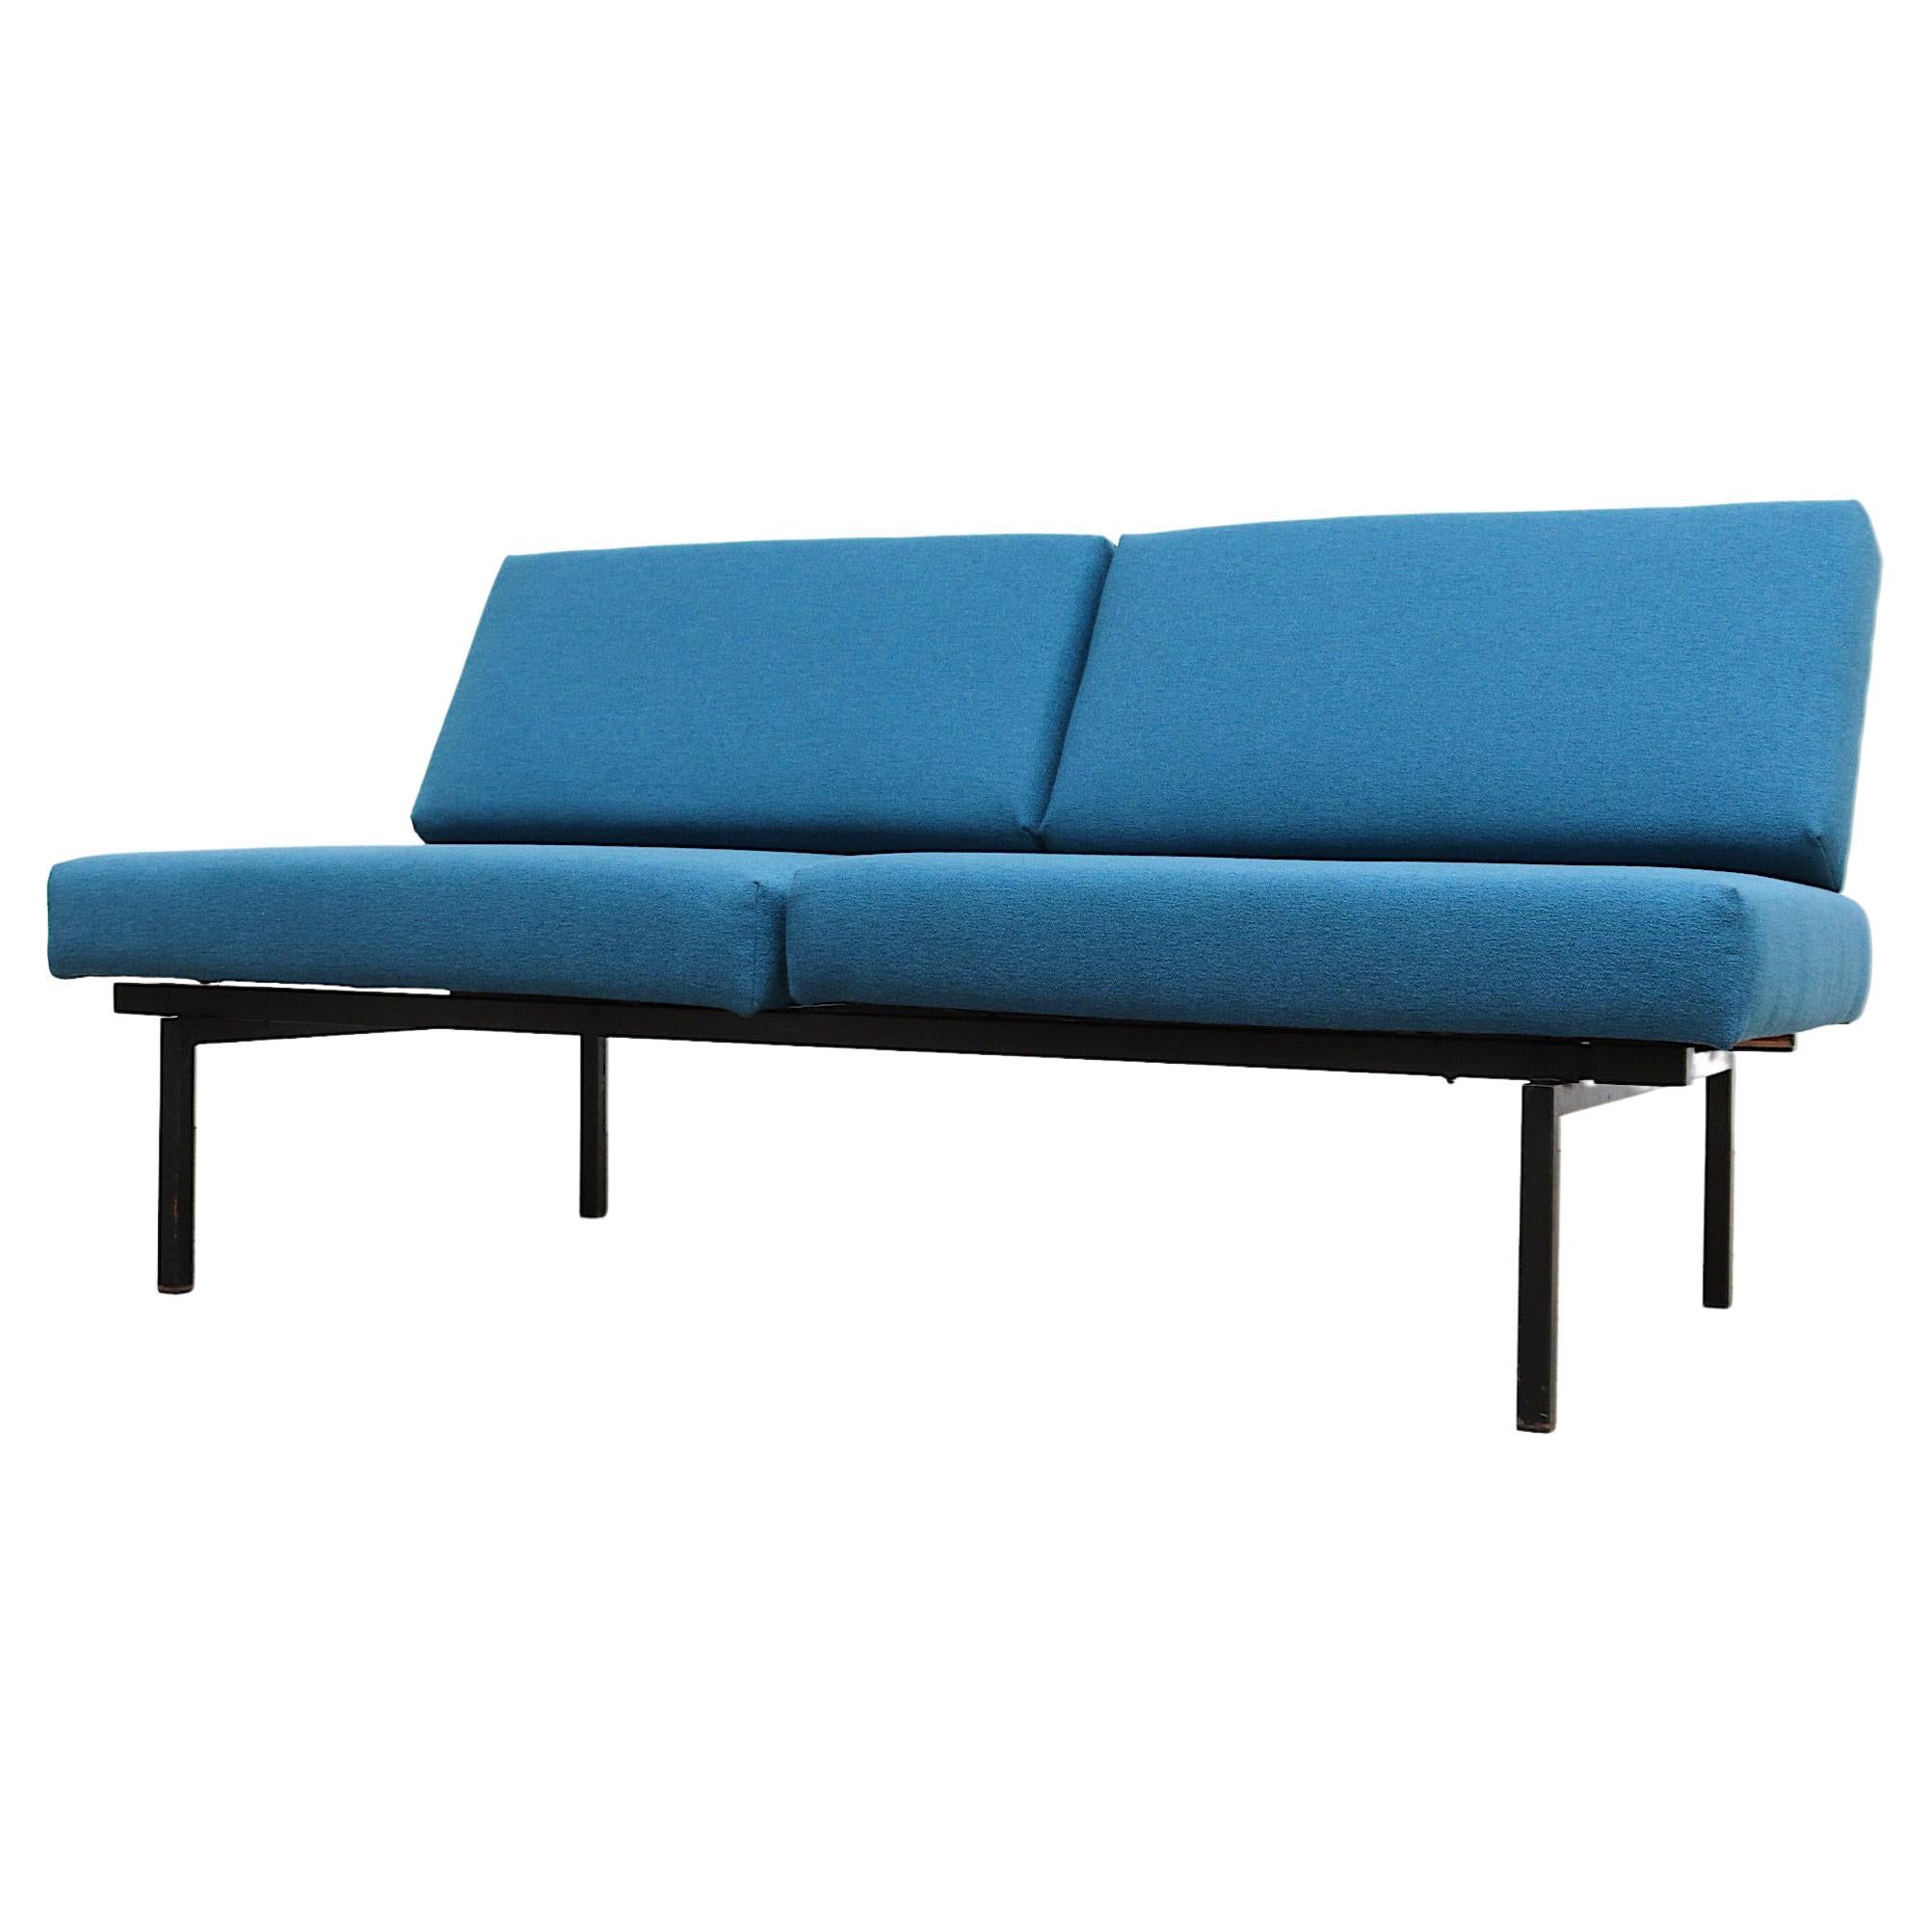 Coen de Vries for Pilastro Convertible Loveseat with Blue Cushions